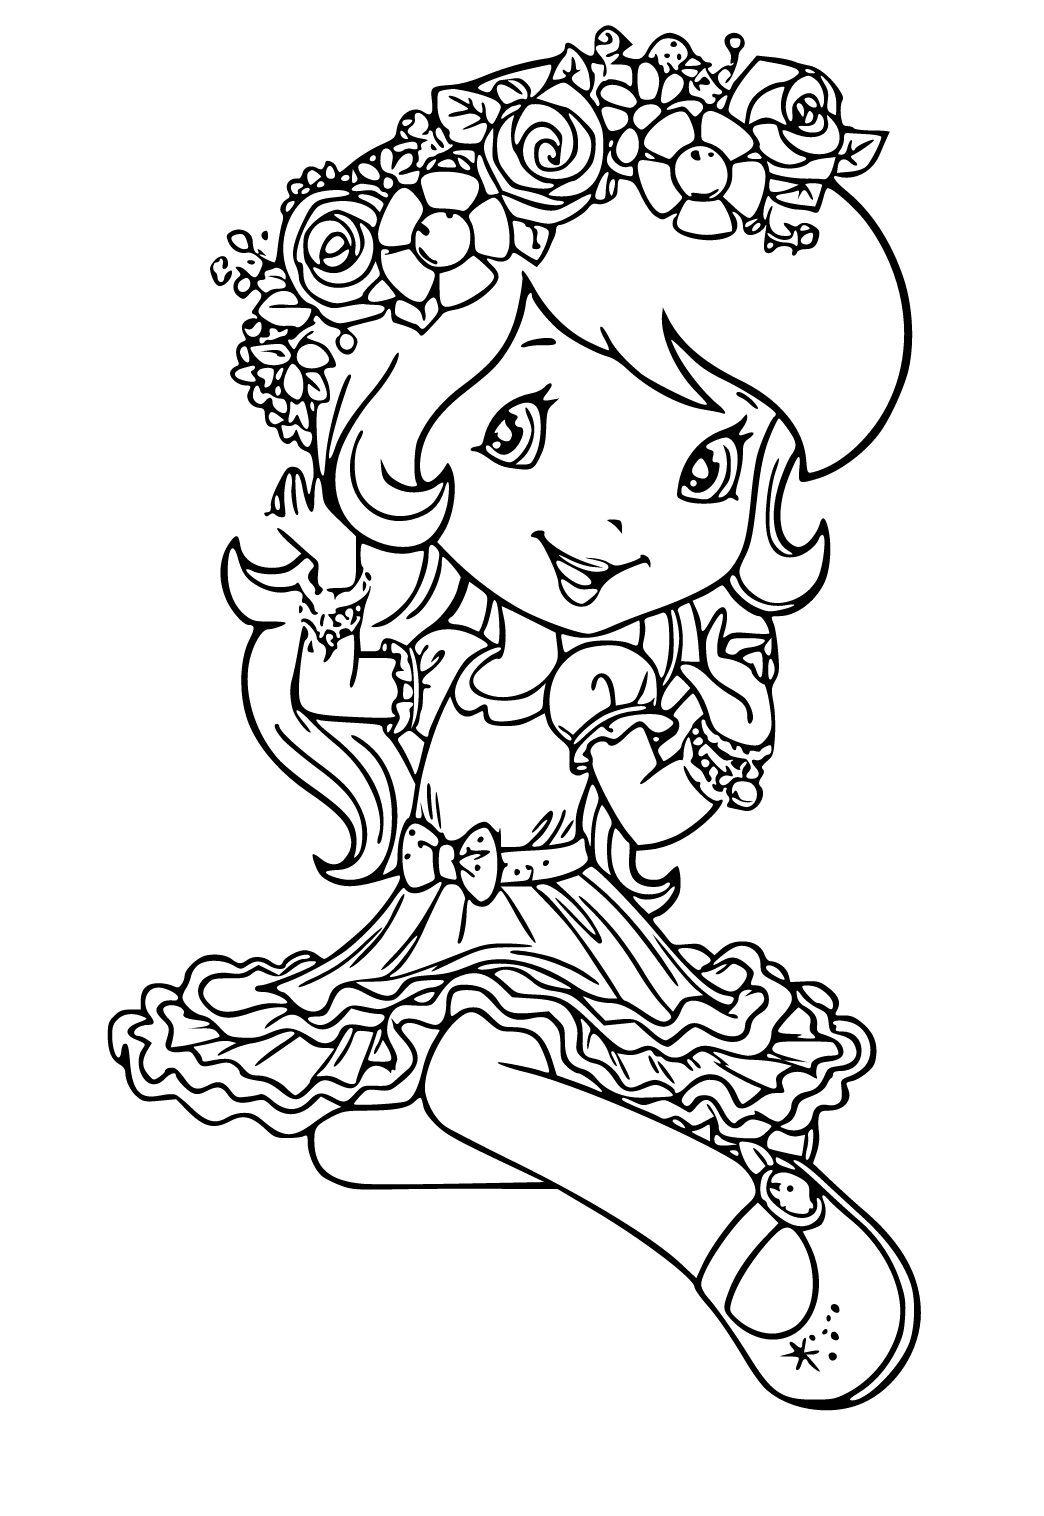 strawberry shortcake berry bitty coloring pages